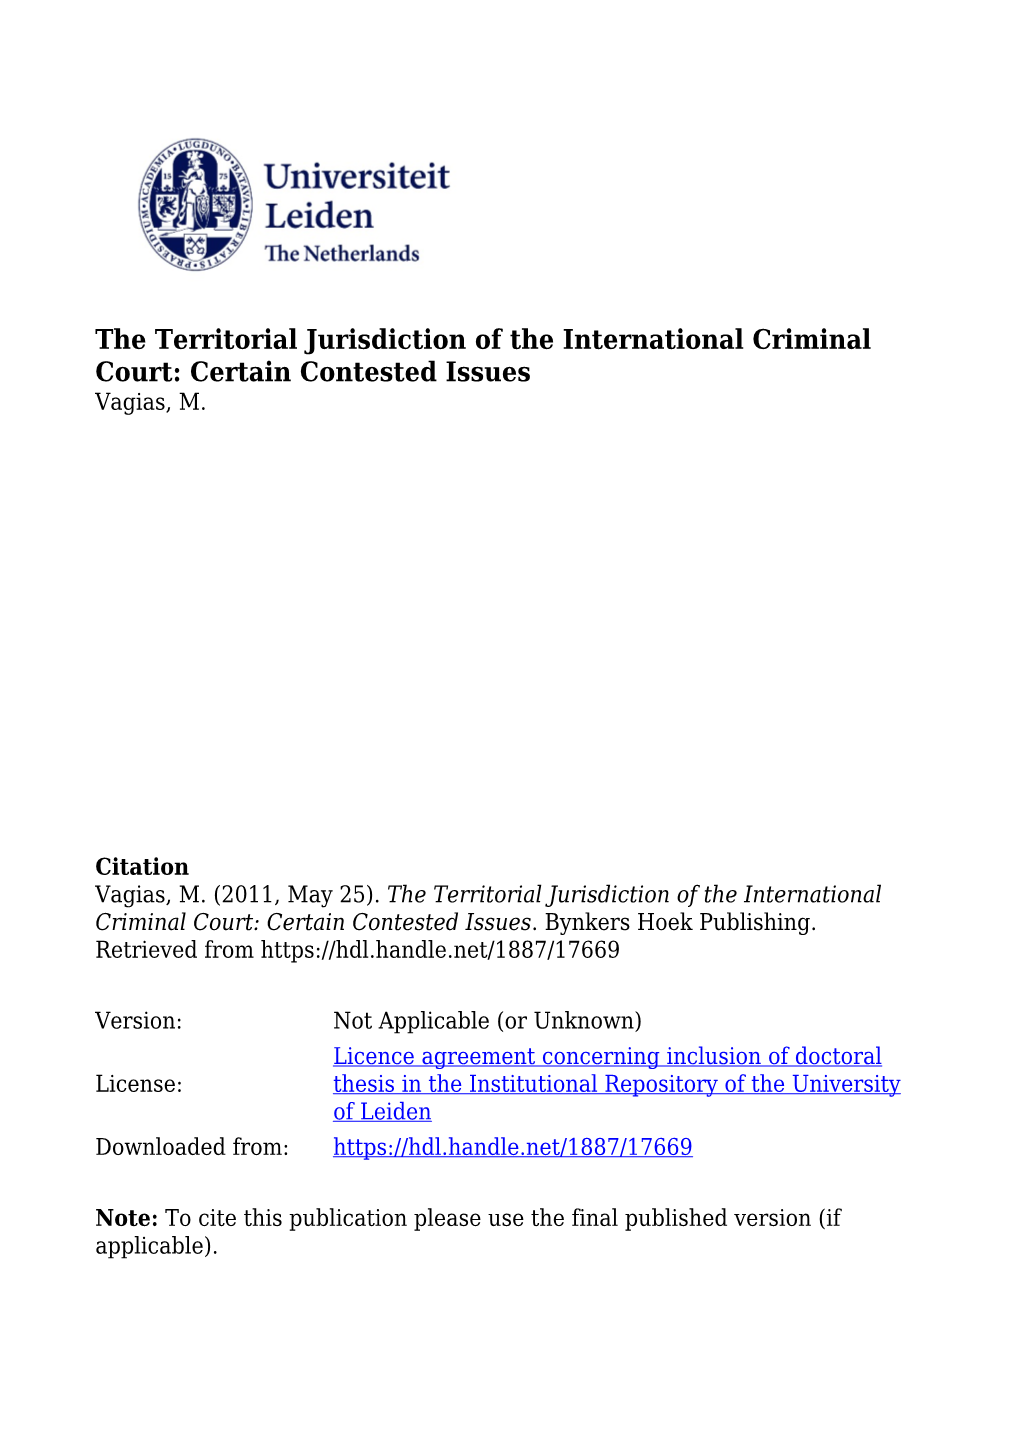 the Territorial Jurisdiction of the International Criminal Court Certain Contested Issues